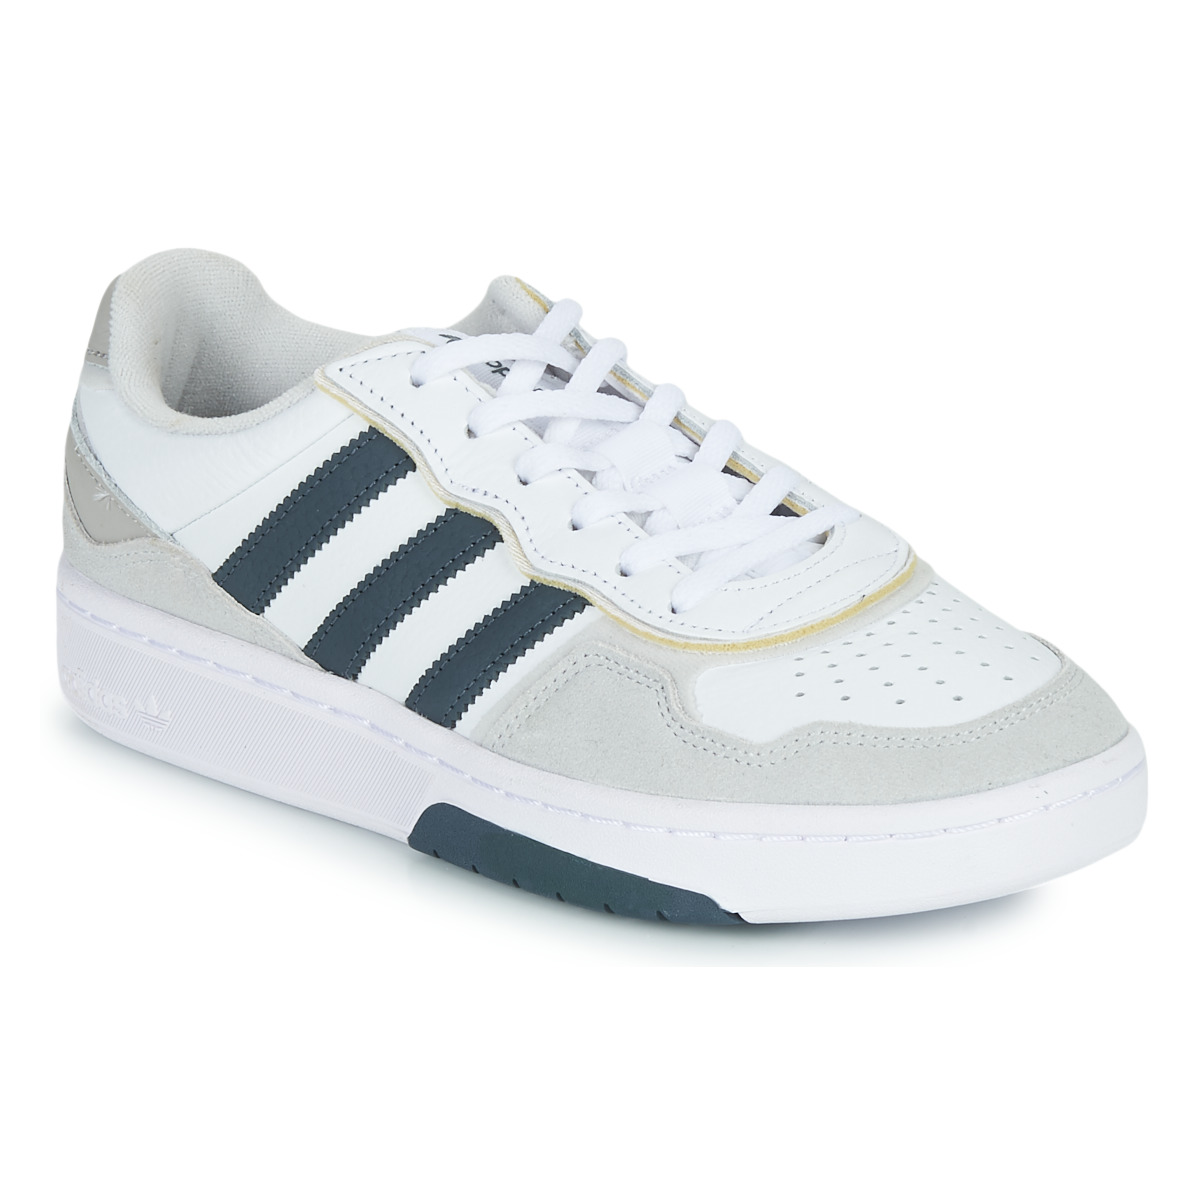 Chaussures adidas mall of asia location list in california COURTIC Blanc / Vert